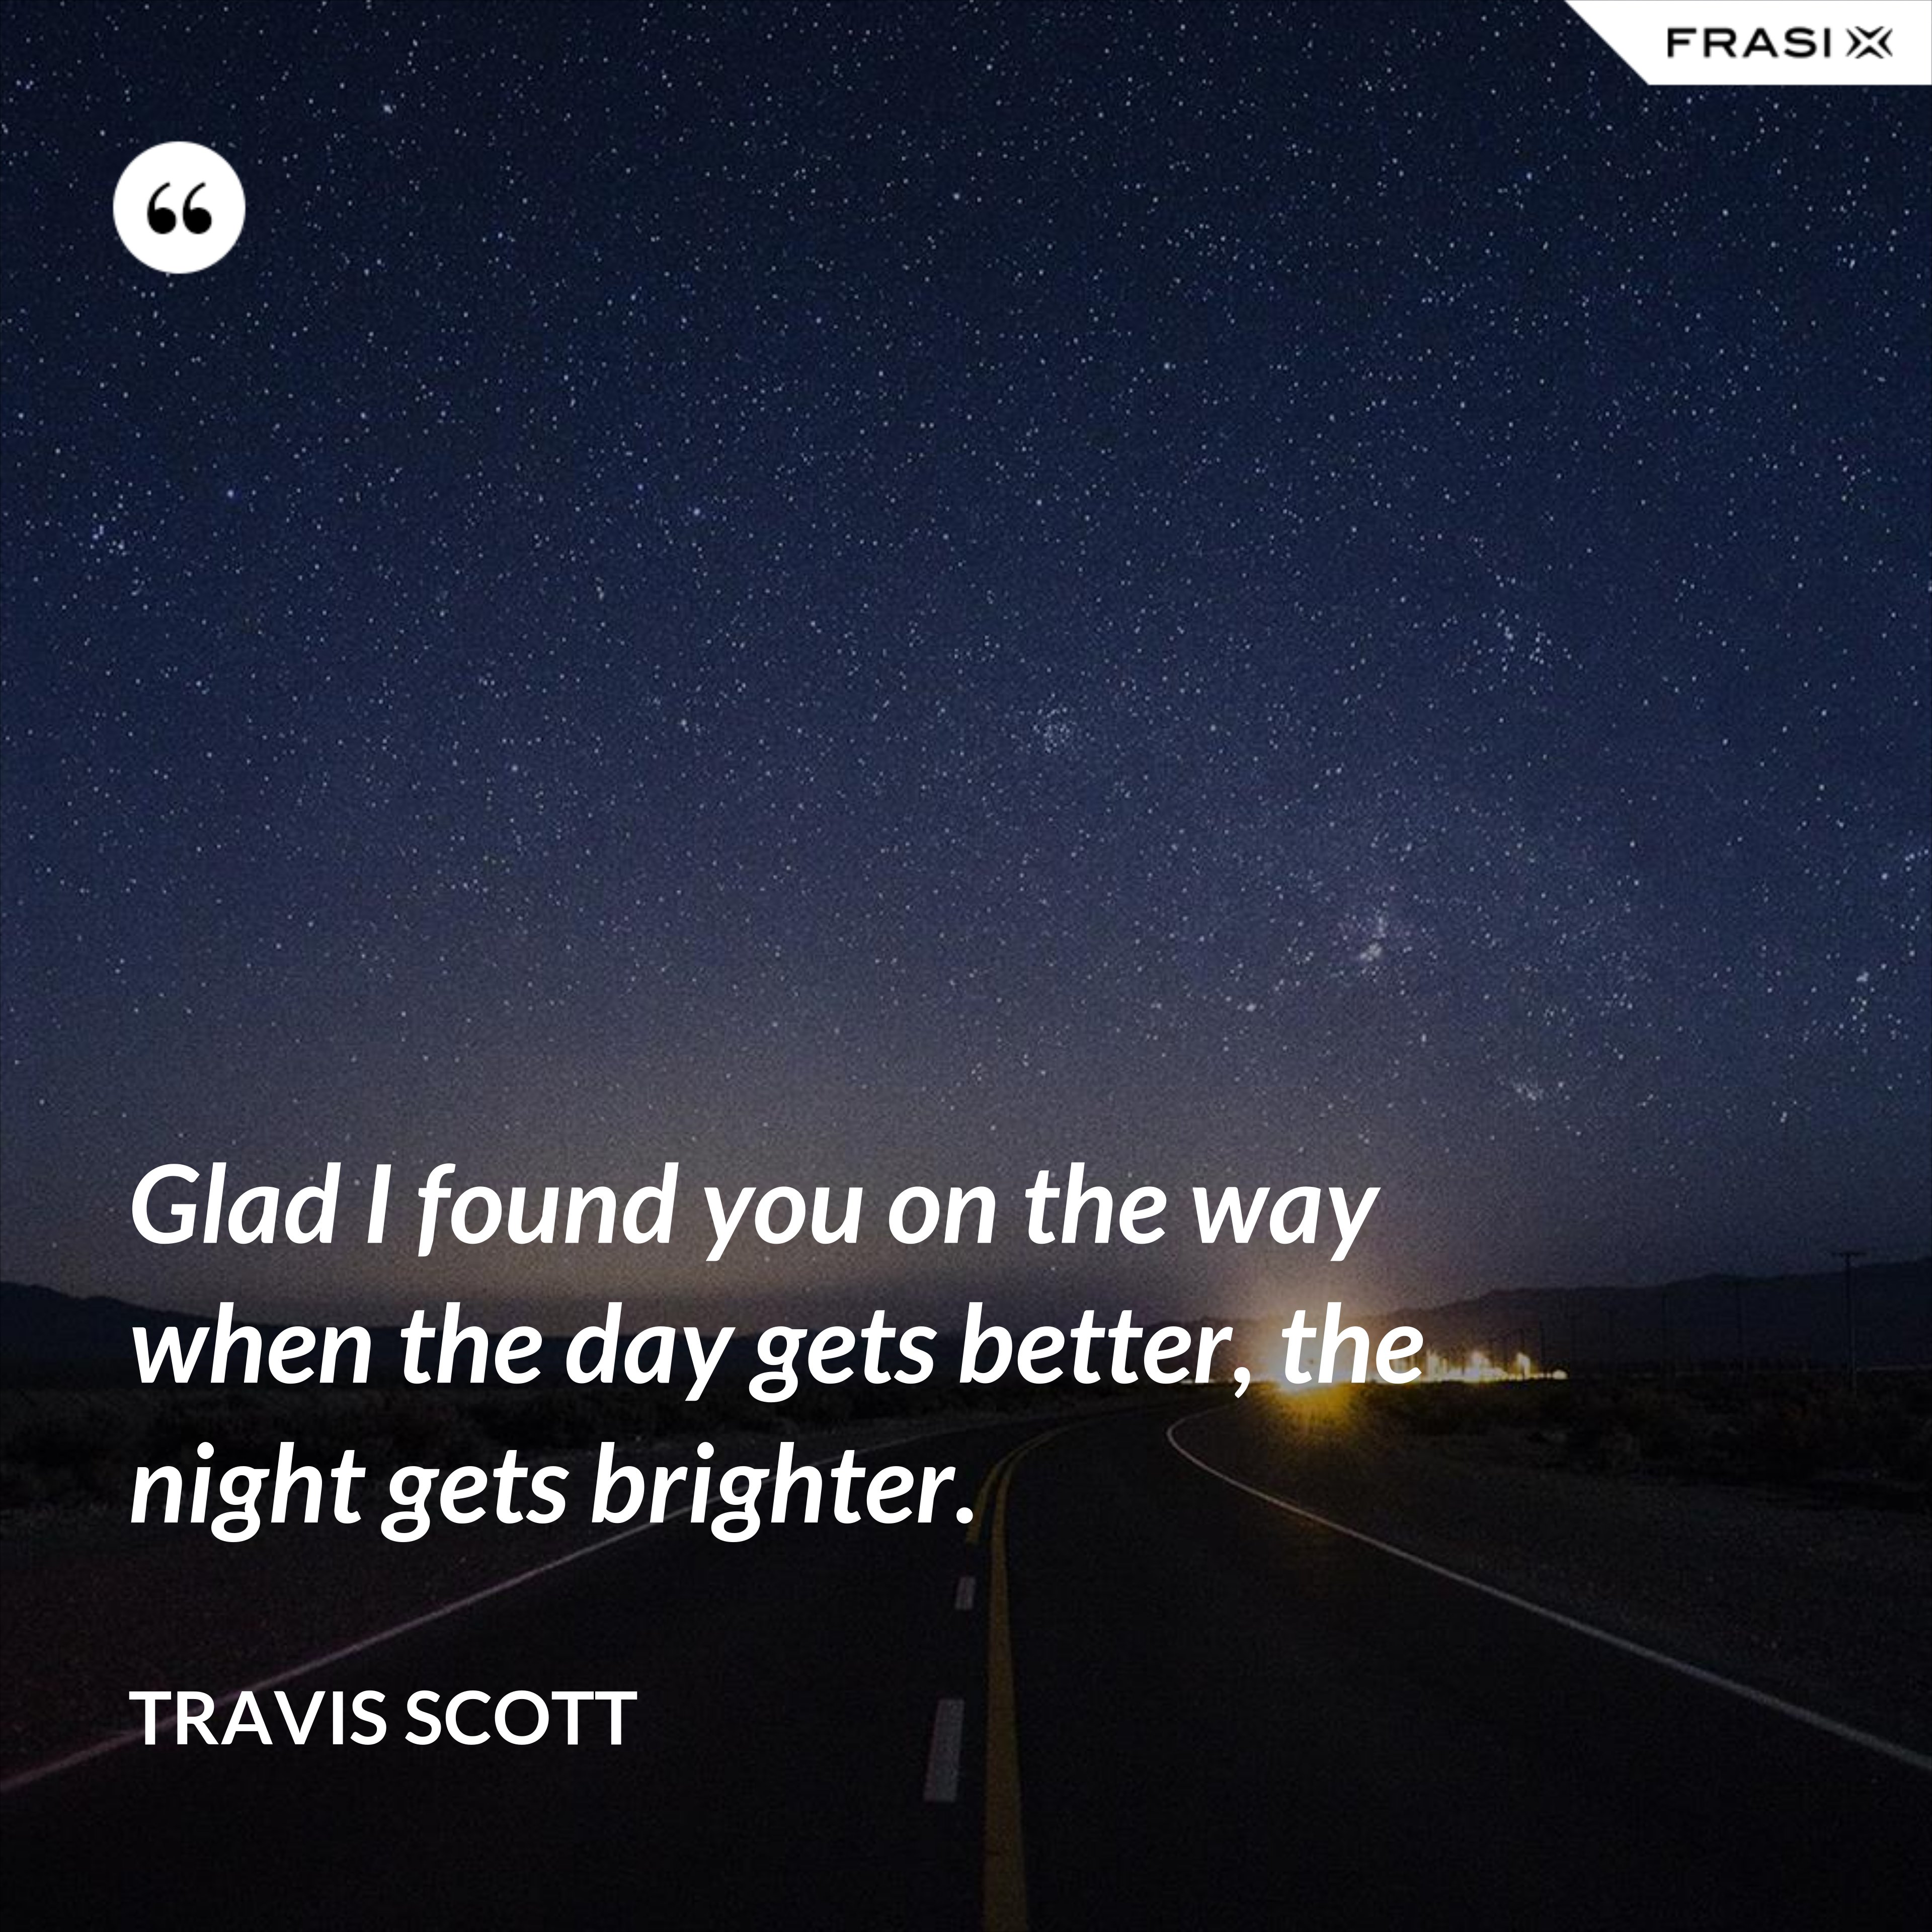 Glad I found you on the way when the day gets better, the night gets brighter. - Travis Scott